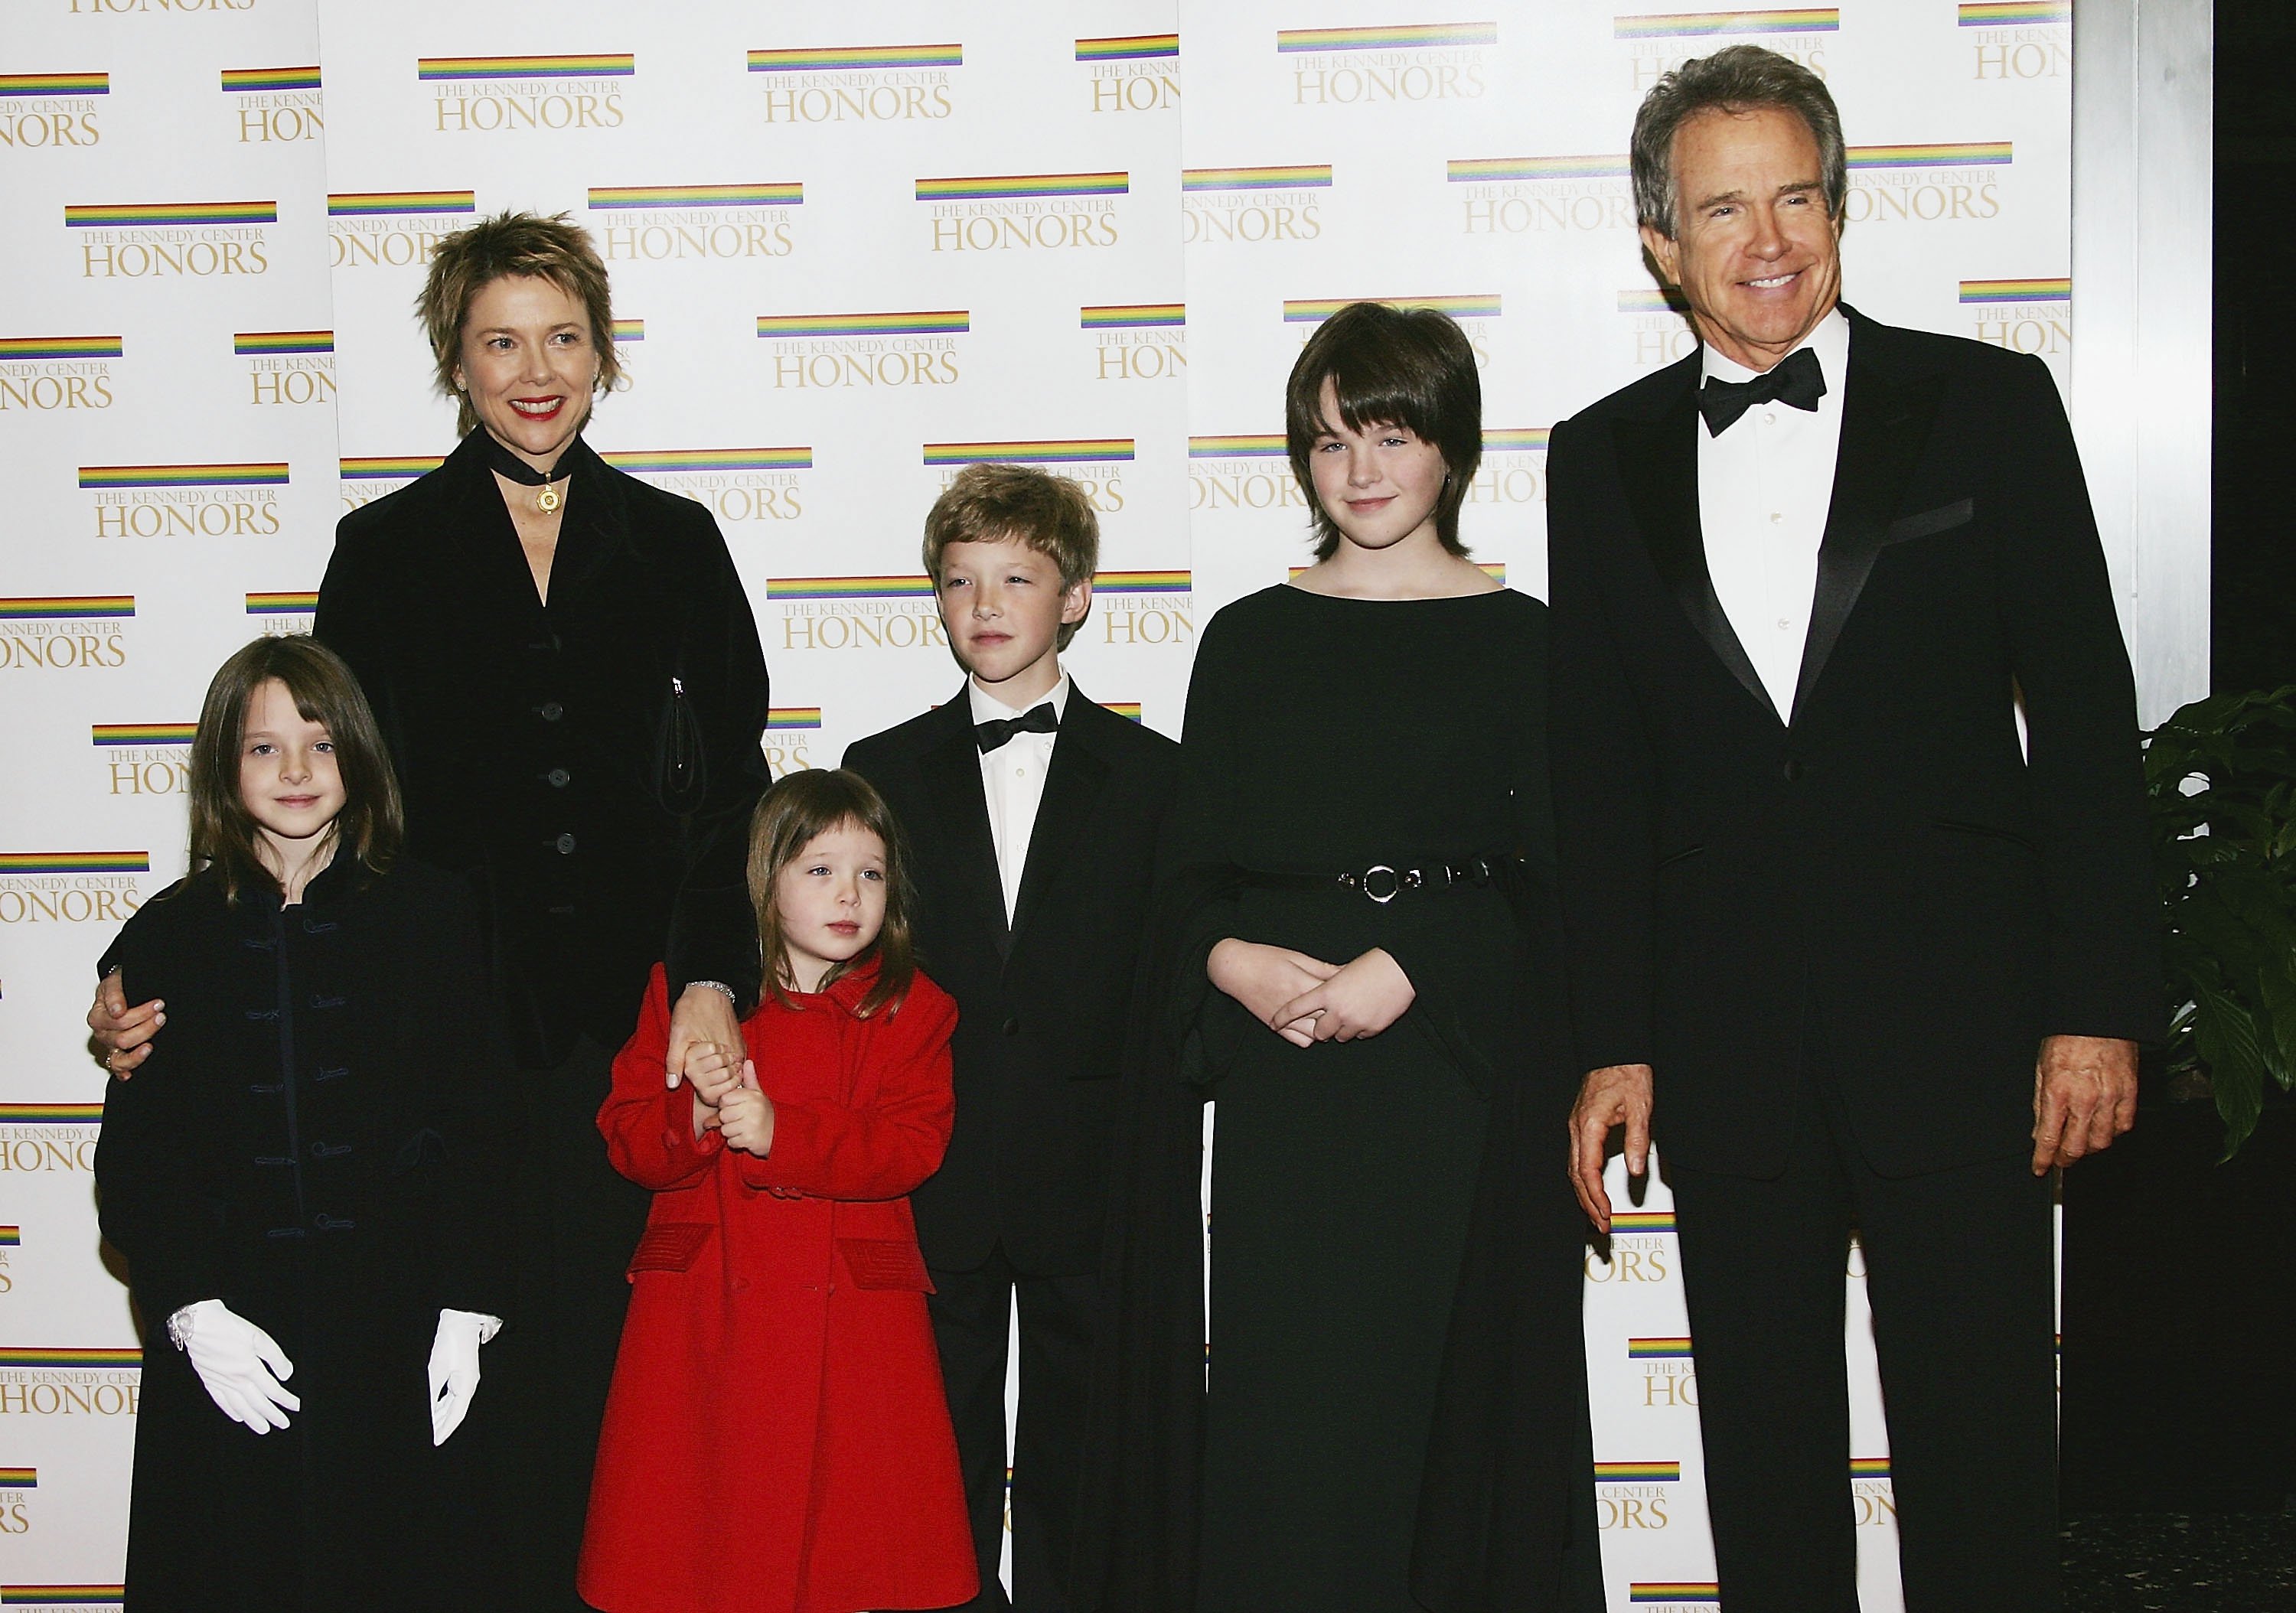 Honoree Warren Beatty poses with wife Annette Bening and children Isabel, Ella, Benjamin and Kathlyn at the 27th Annual Kennedy Center Honors at U.S. Department of State, December 4, 2004 in Washington, DC.